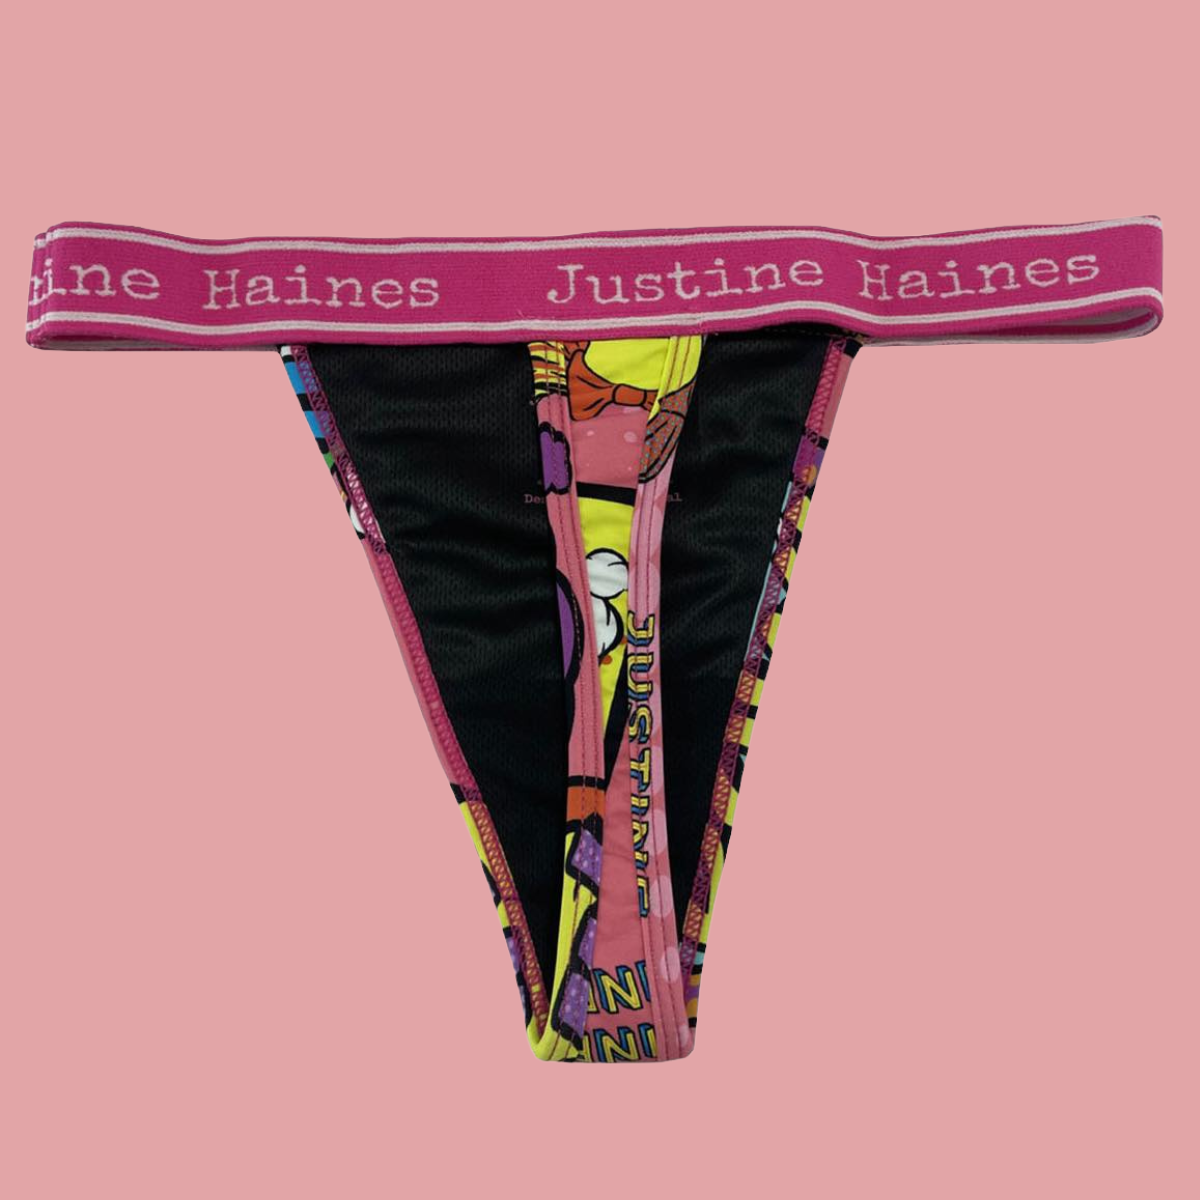 https://www.justinehaines.com/products/wear-thongs-on-your-period-hot-pink-pop-art